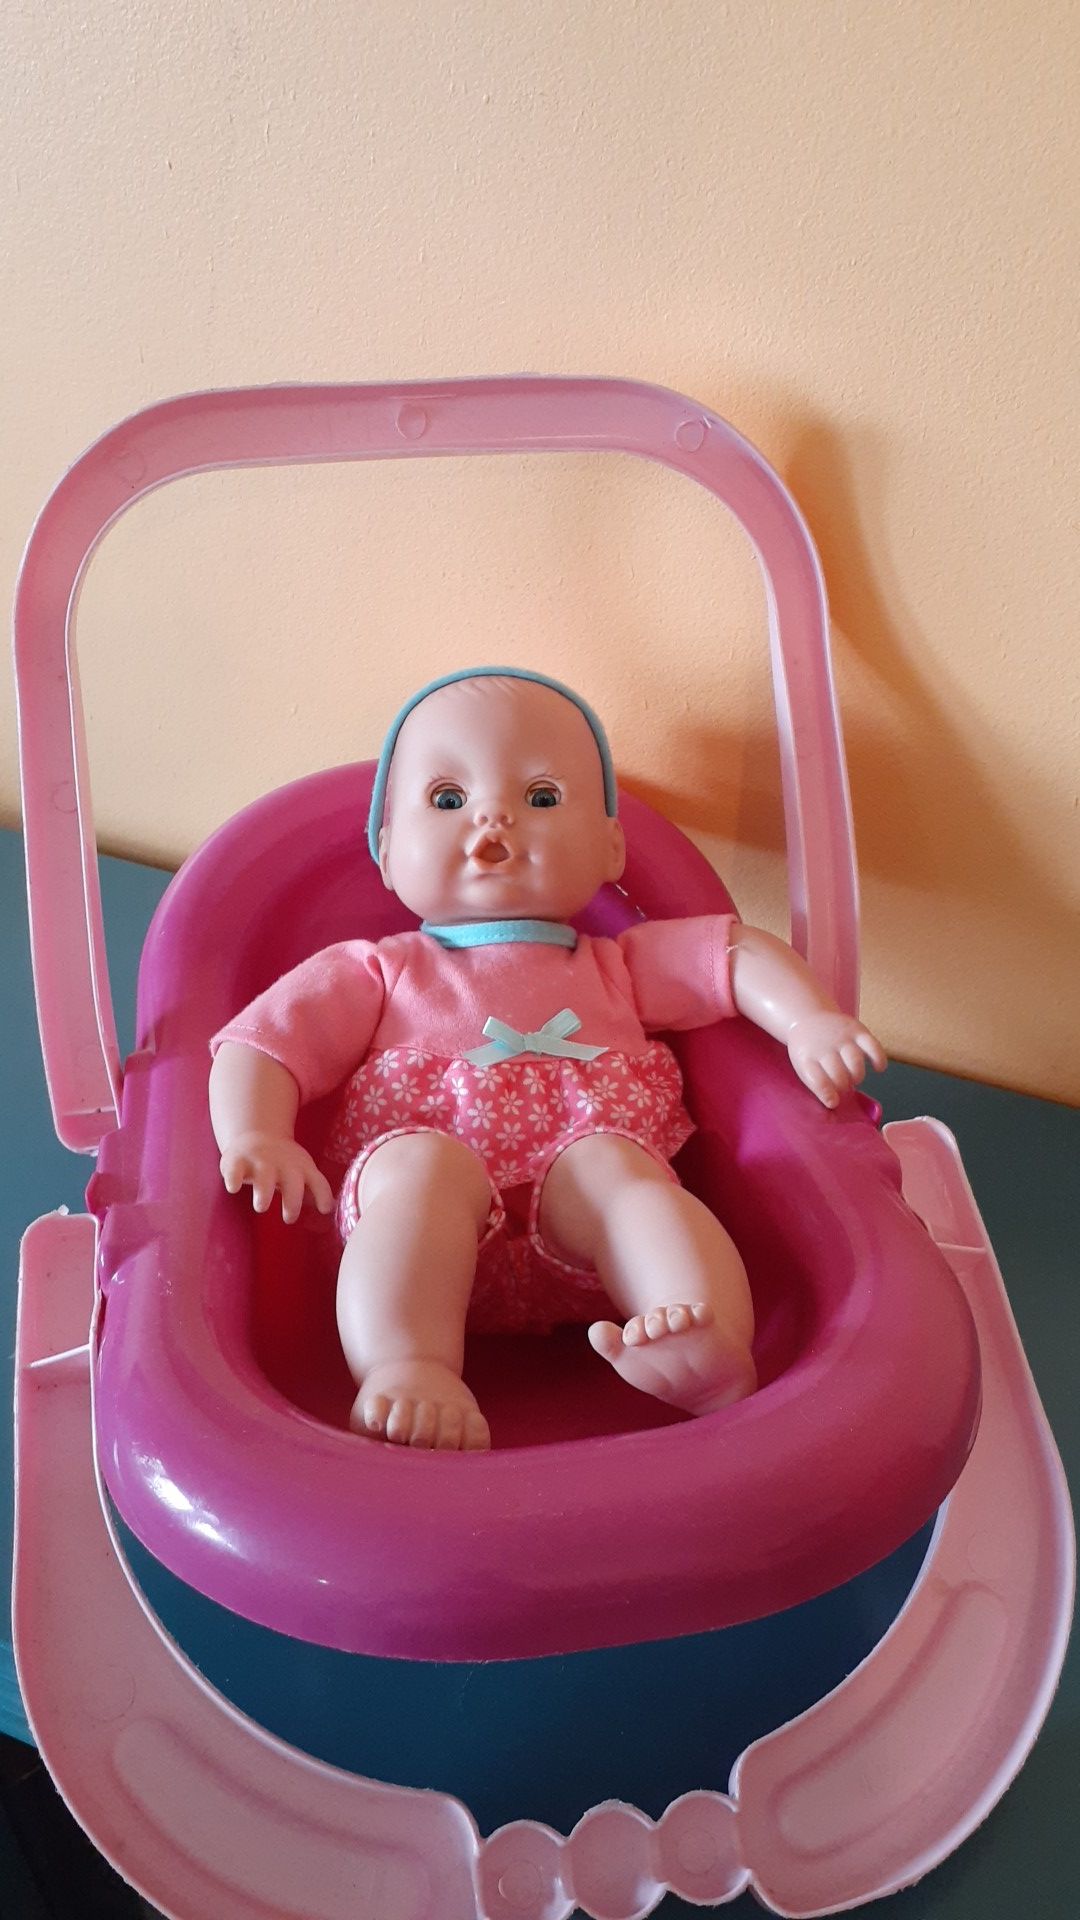 Baby doll 9" with carrier.